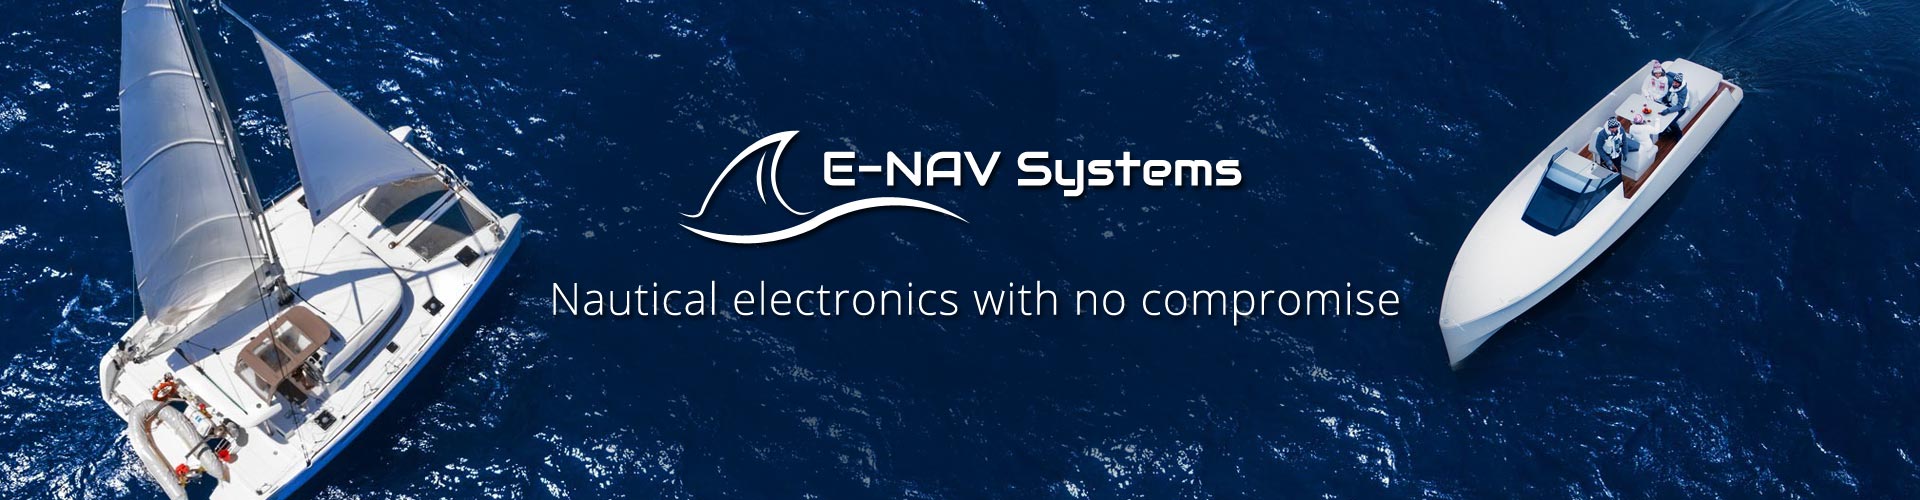 e-nav systems provider of propulsion and green energy solutions for boats